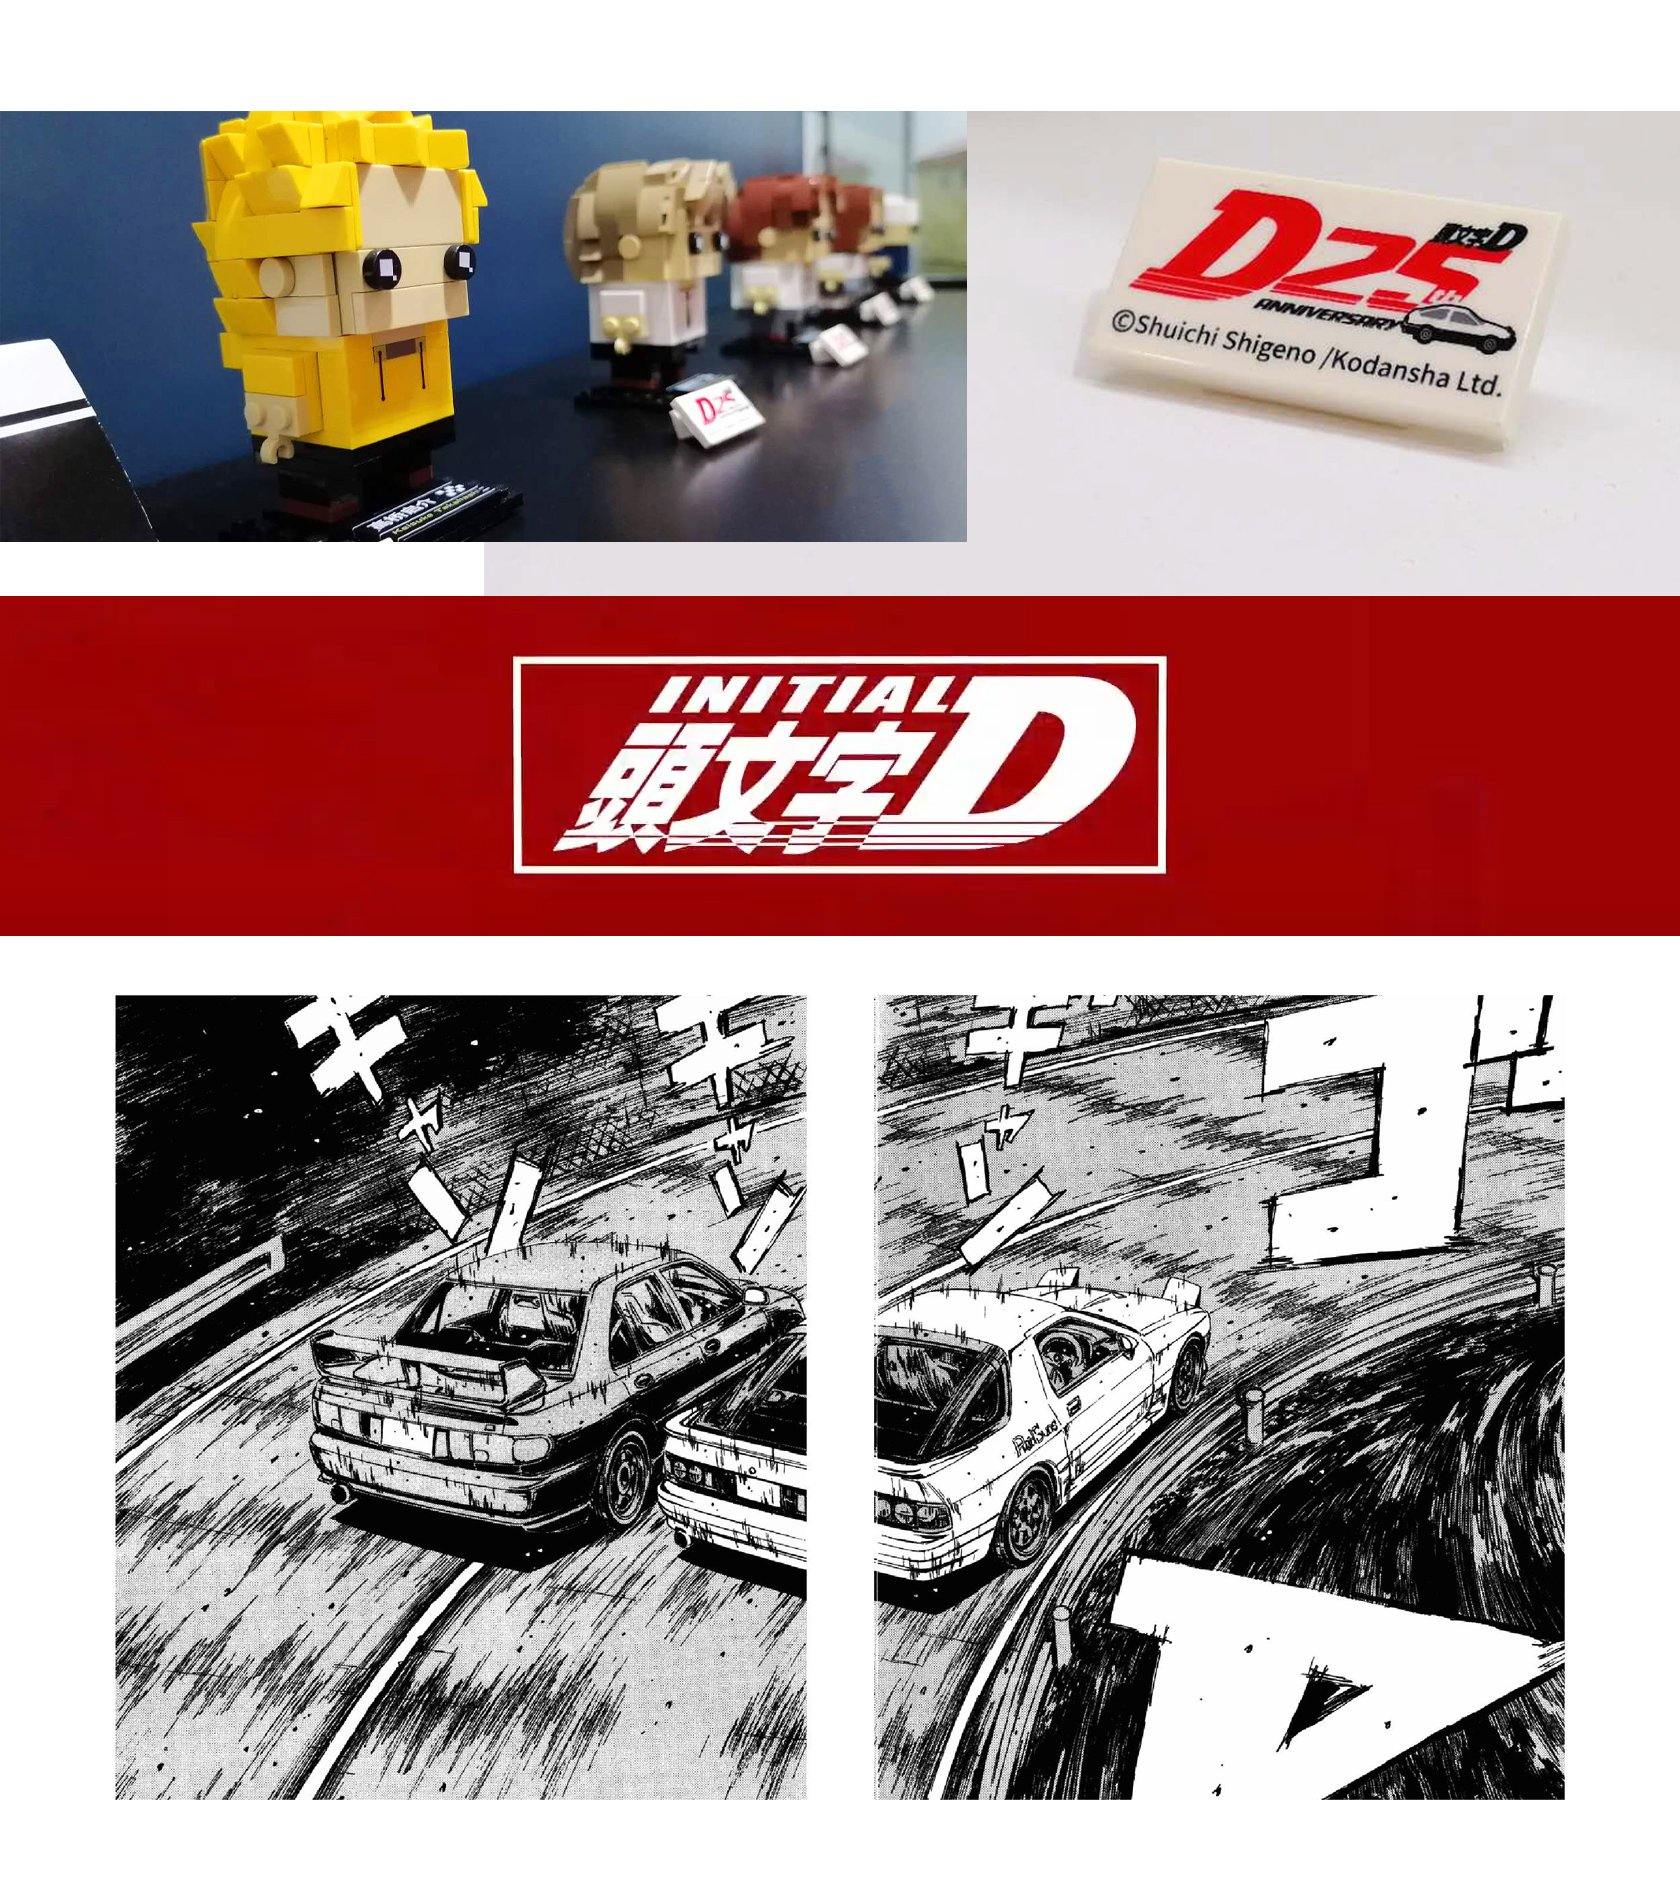 Celebrating Initial D 's 25th Anniversary - Doublee_CaDA